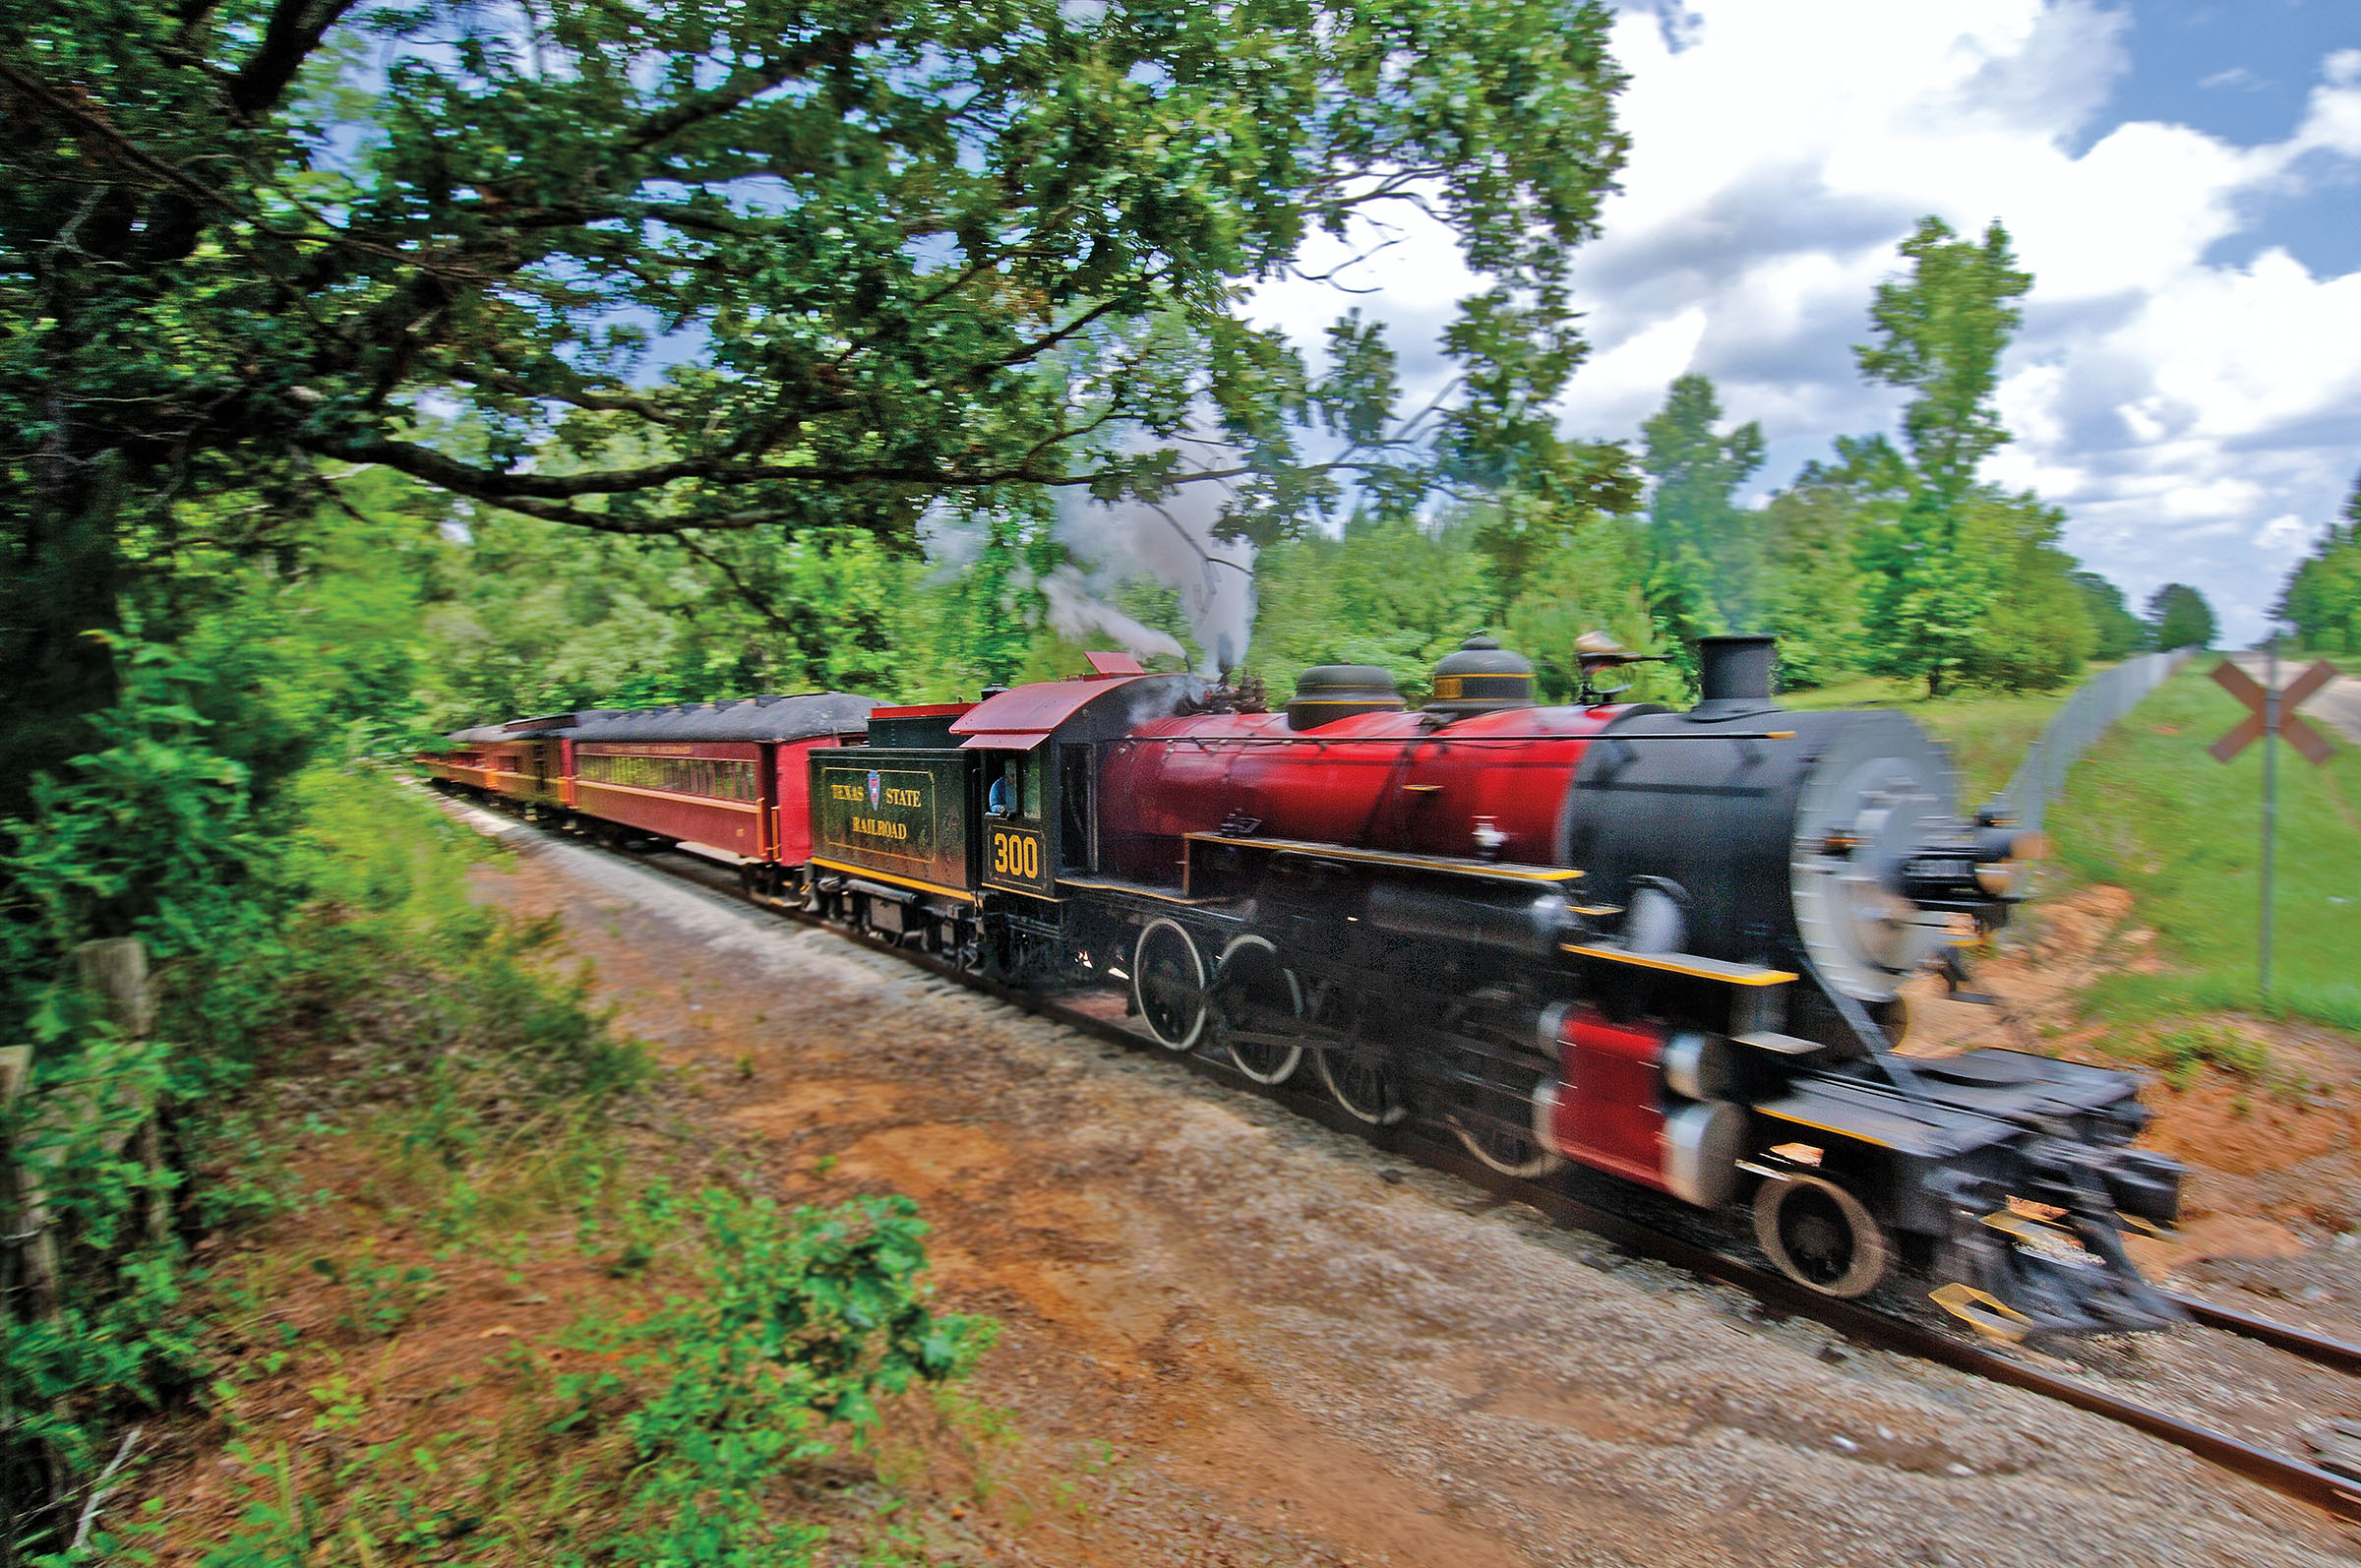 A black and red steam locomotive speeds by on train tracks in a natural environment